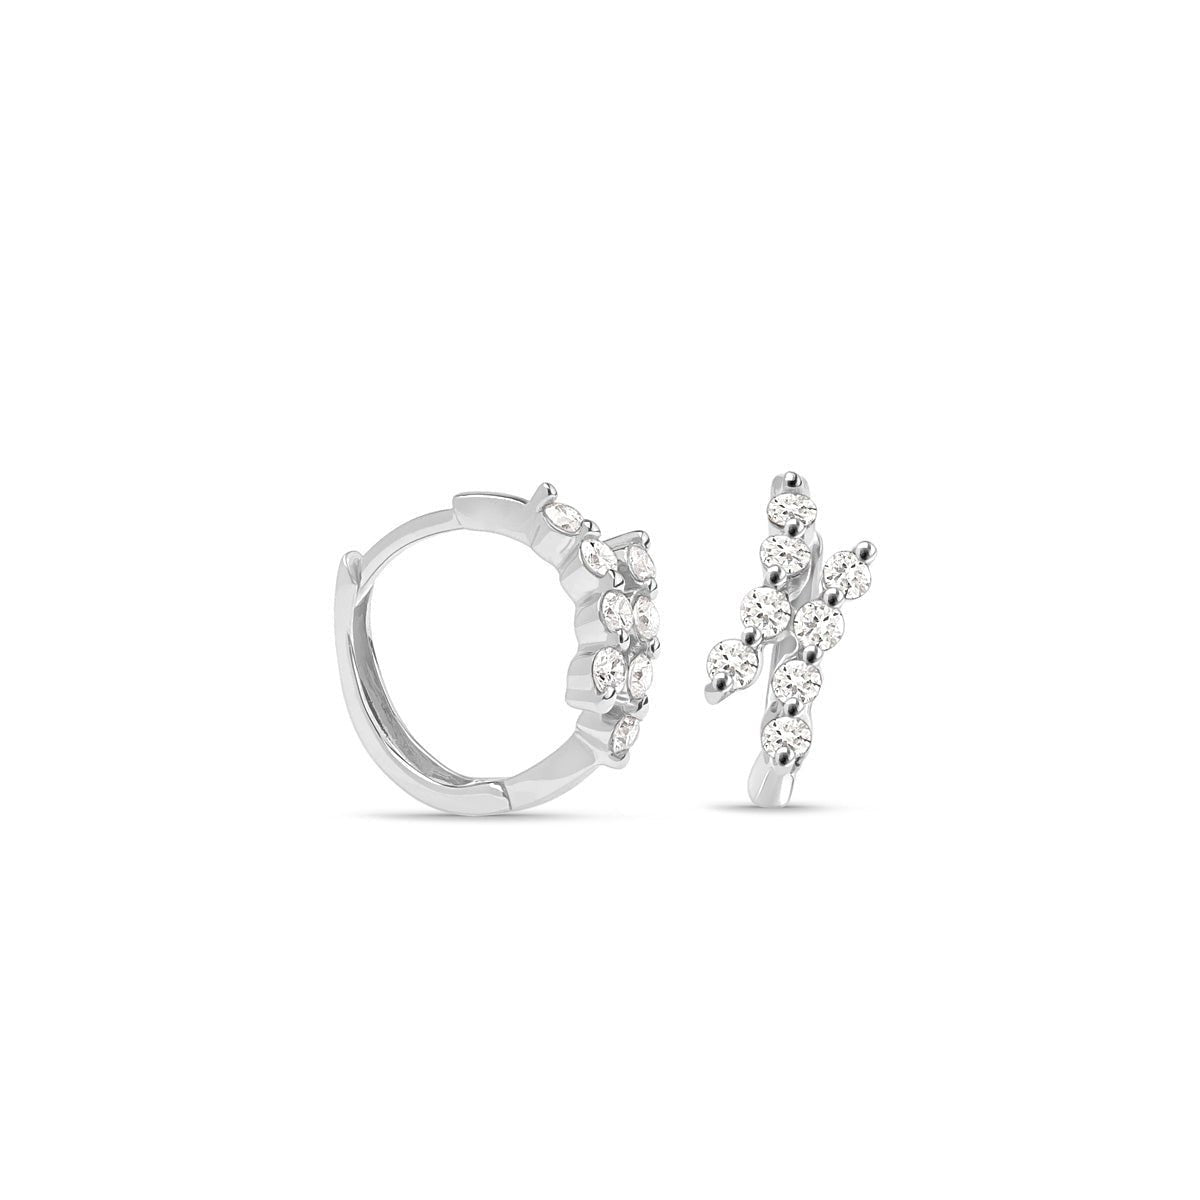 Diamond Double Curve Interlocking Huggie Earrings Earrings Estella Collection #product_description# 17271 14k Birthstone Birthstone Earrings #tag4# #tag5# #tag6# #tag7# #tag8# #tag9# #tag10#